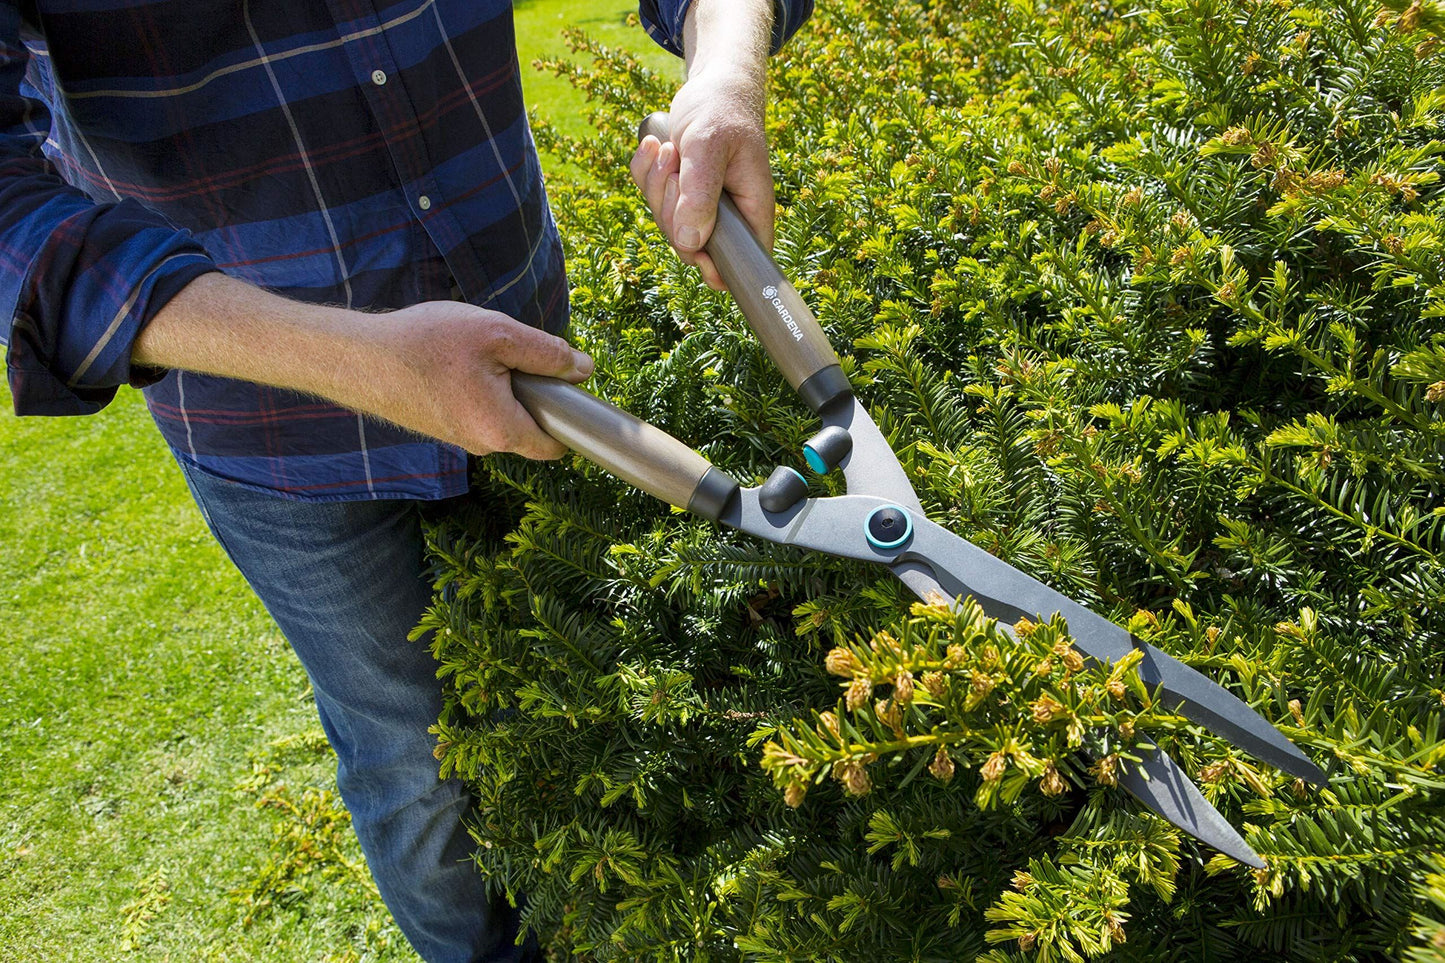 Gardena Naturecut Hedge Clippers: Sturdy Clippers for Cutting Hedges and Thicker Branches, 23 cm, with Non-Stick Blade Coating and Ergonomic Wooden Handles (12300-20)